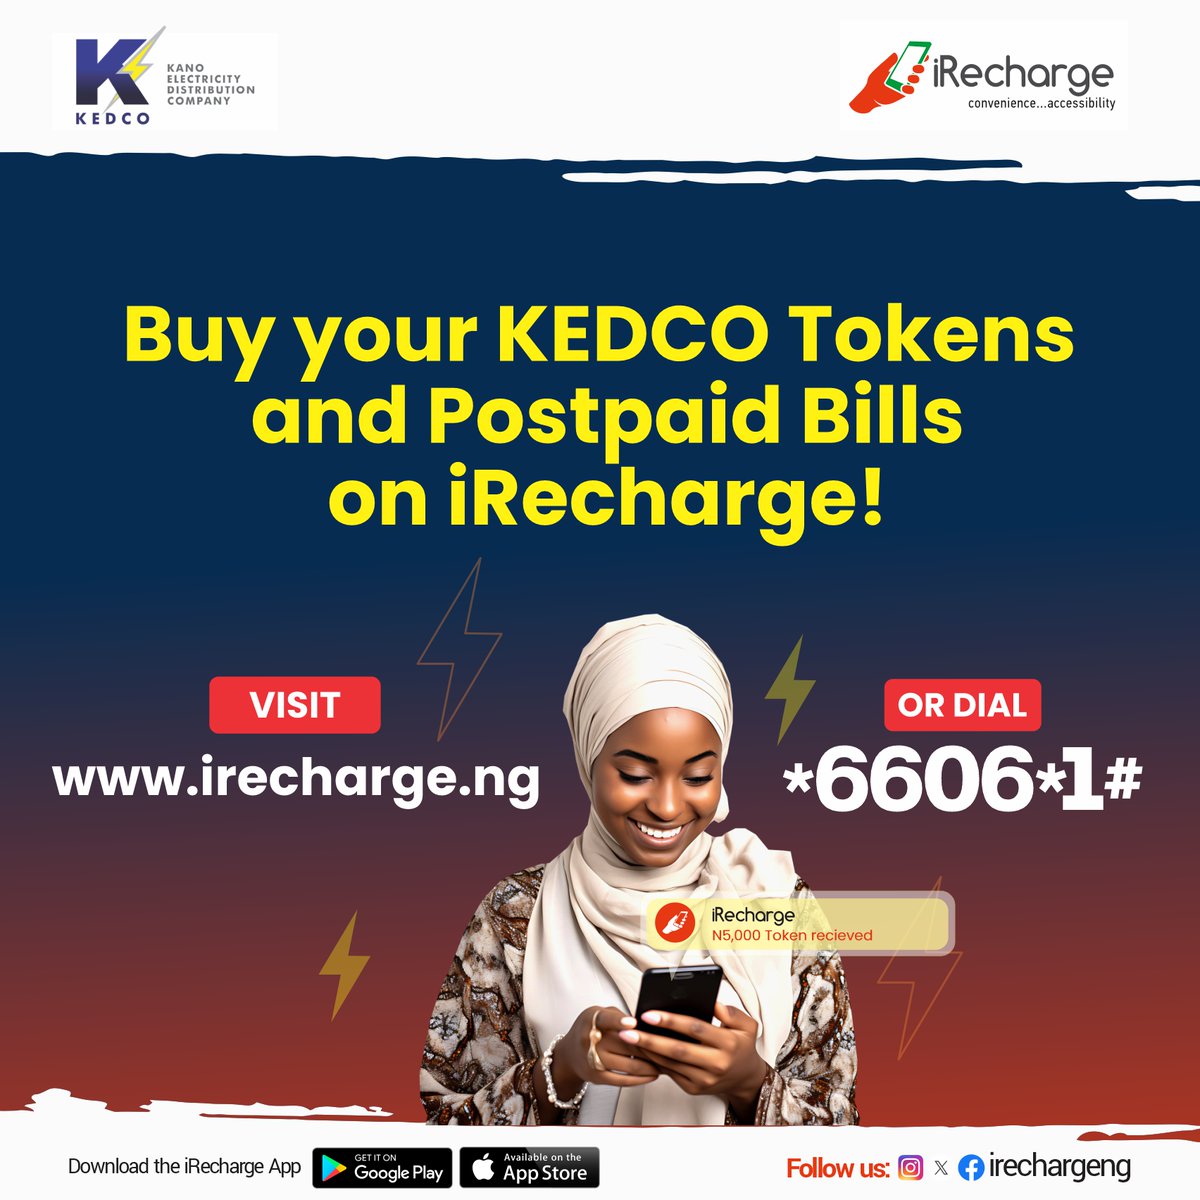 Need to pay your @kedcoplc prepaid electricity and postpaid bills? Simply visit  irecharge.ng to easily settle your KEDCO bills without any stress. And receive the value of your purchase in seconds!

#ElectricityMadeEasy #KEDCO #iRecharge #electricitybills